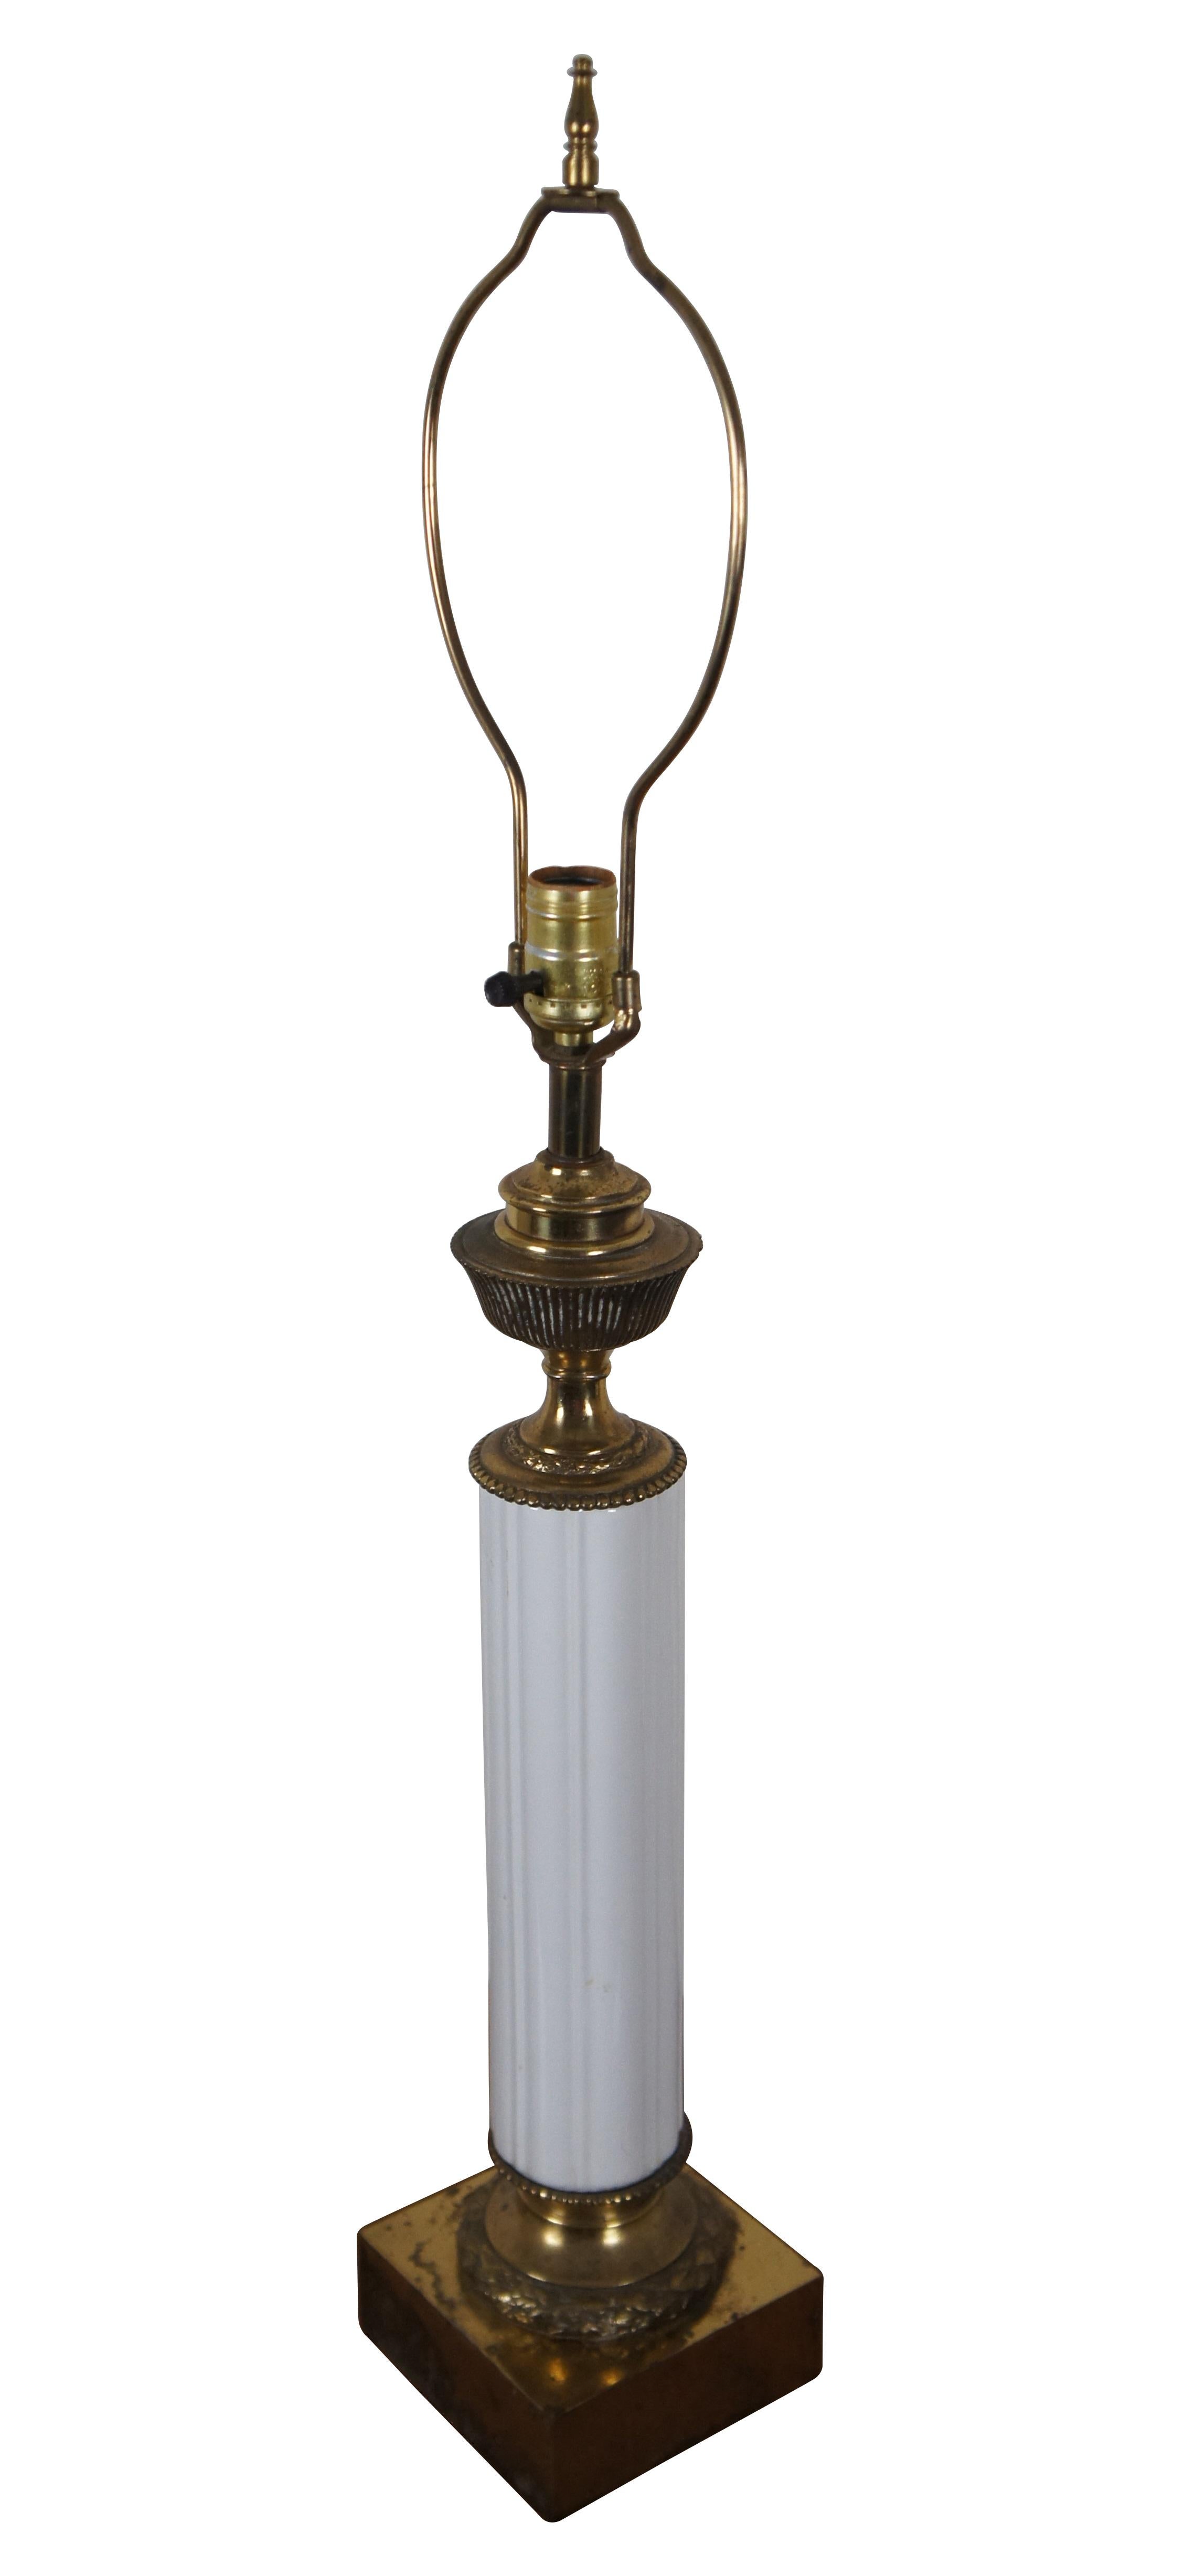 Vintage Tyndale brass and milk glass table lamp featuring Neoclassical styling.

Dimensions:
5.5